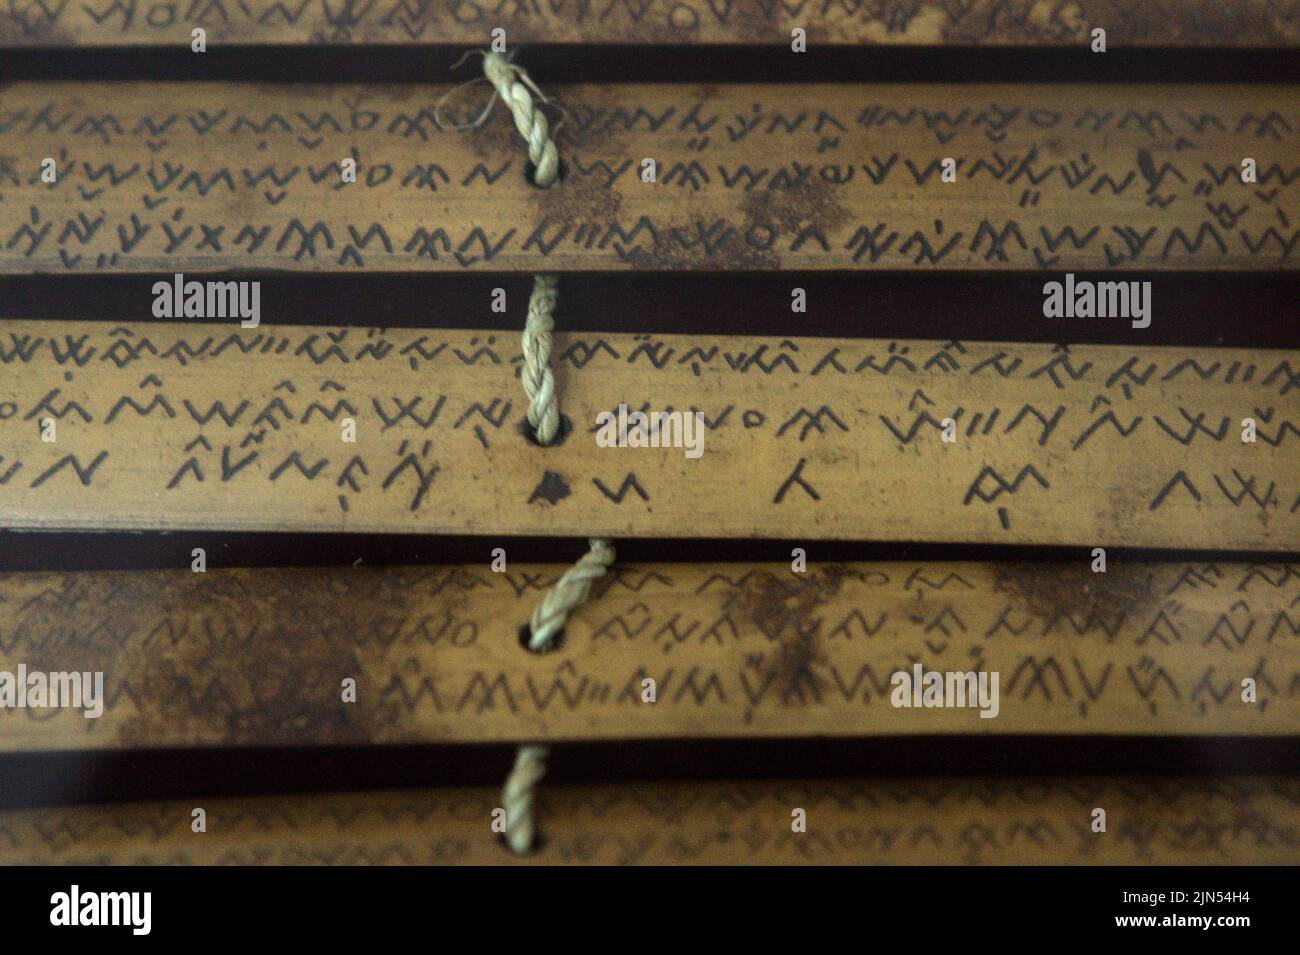 Ancient scripts written on bamboo—originated from Lampung (Sumatra)—is photographed at the National Library in Jakarta, Indonesia. Stock Photo